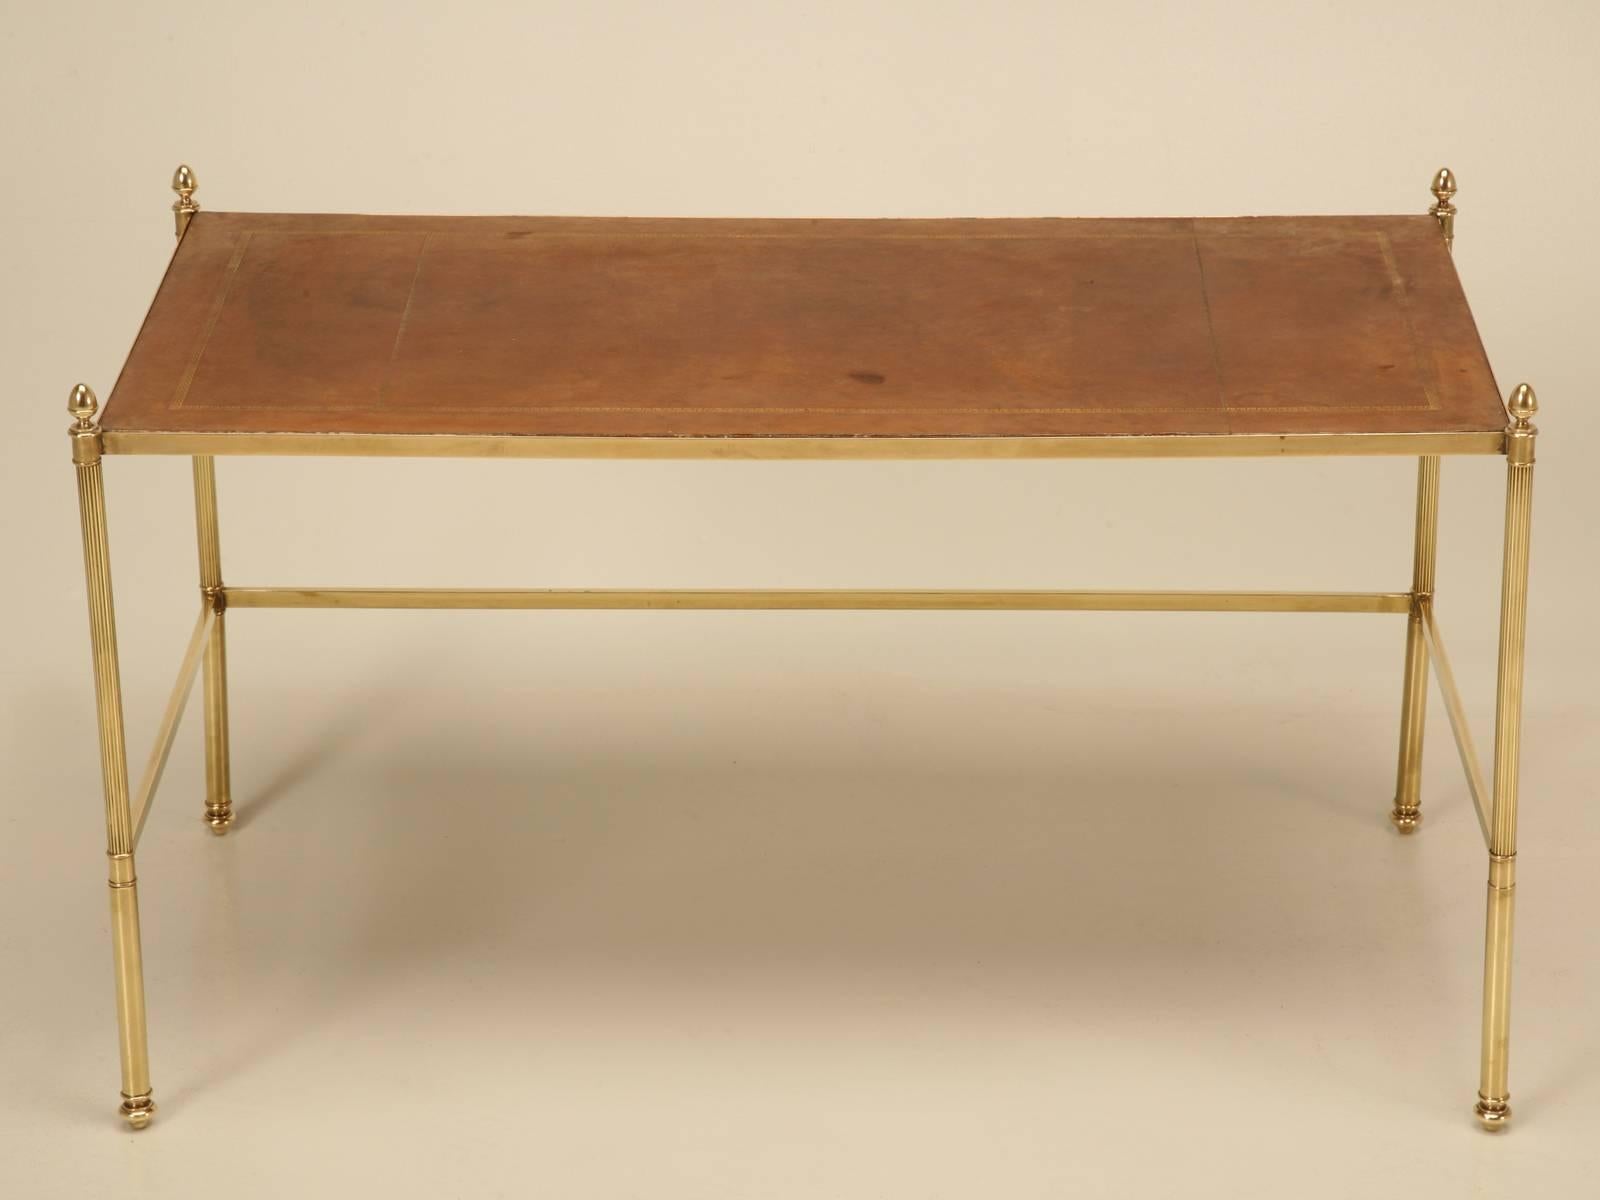 Elegant French mid-century modern coffee table made from brass and adorned with a leather top. Probably made in the 1960’s and is a refreshing change from all the mirrored top tables they produced in that era. 
**Height provided does not include